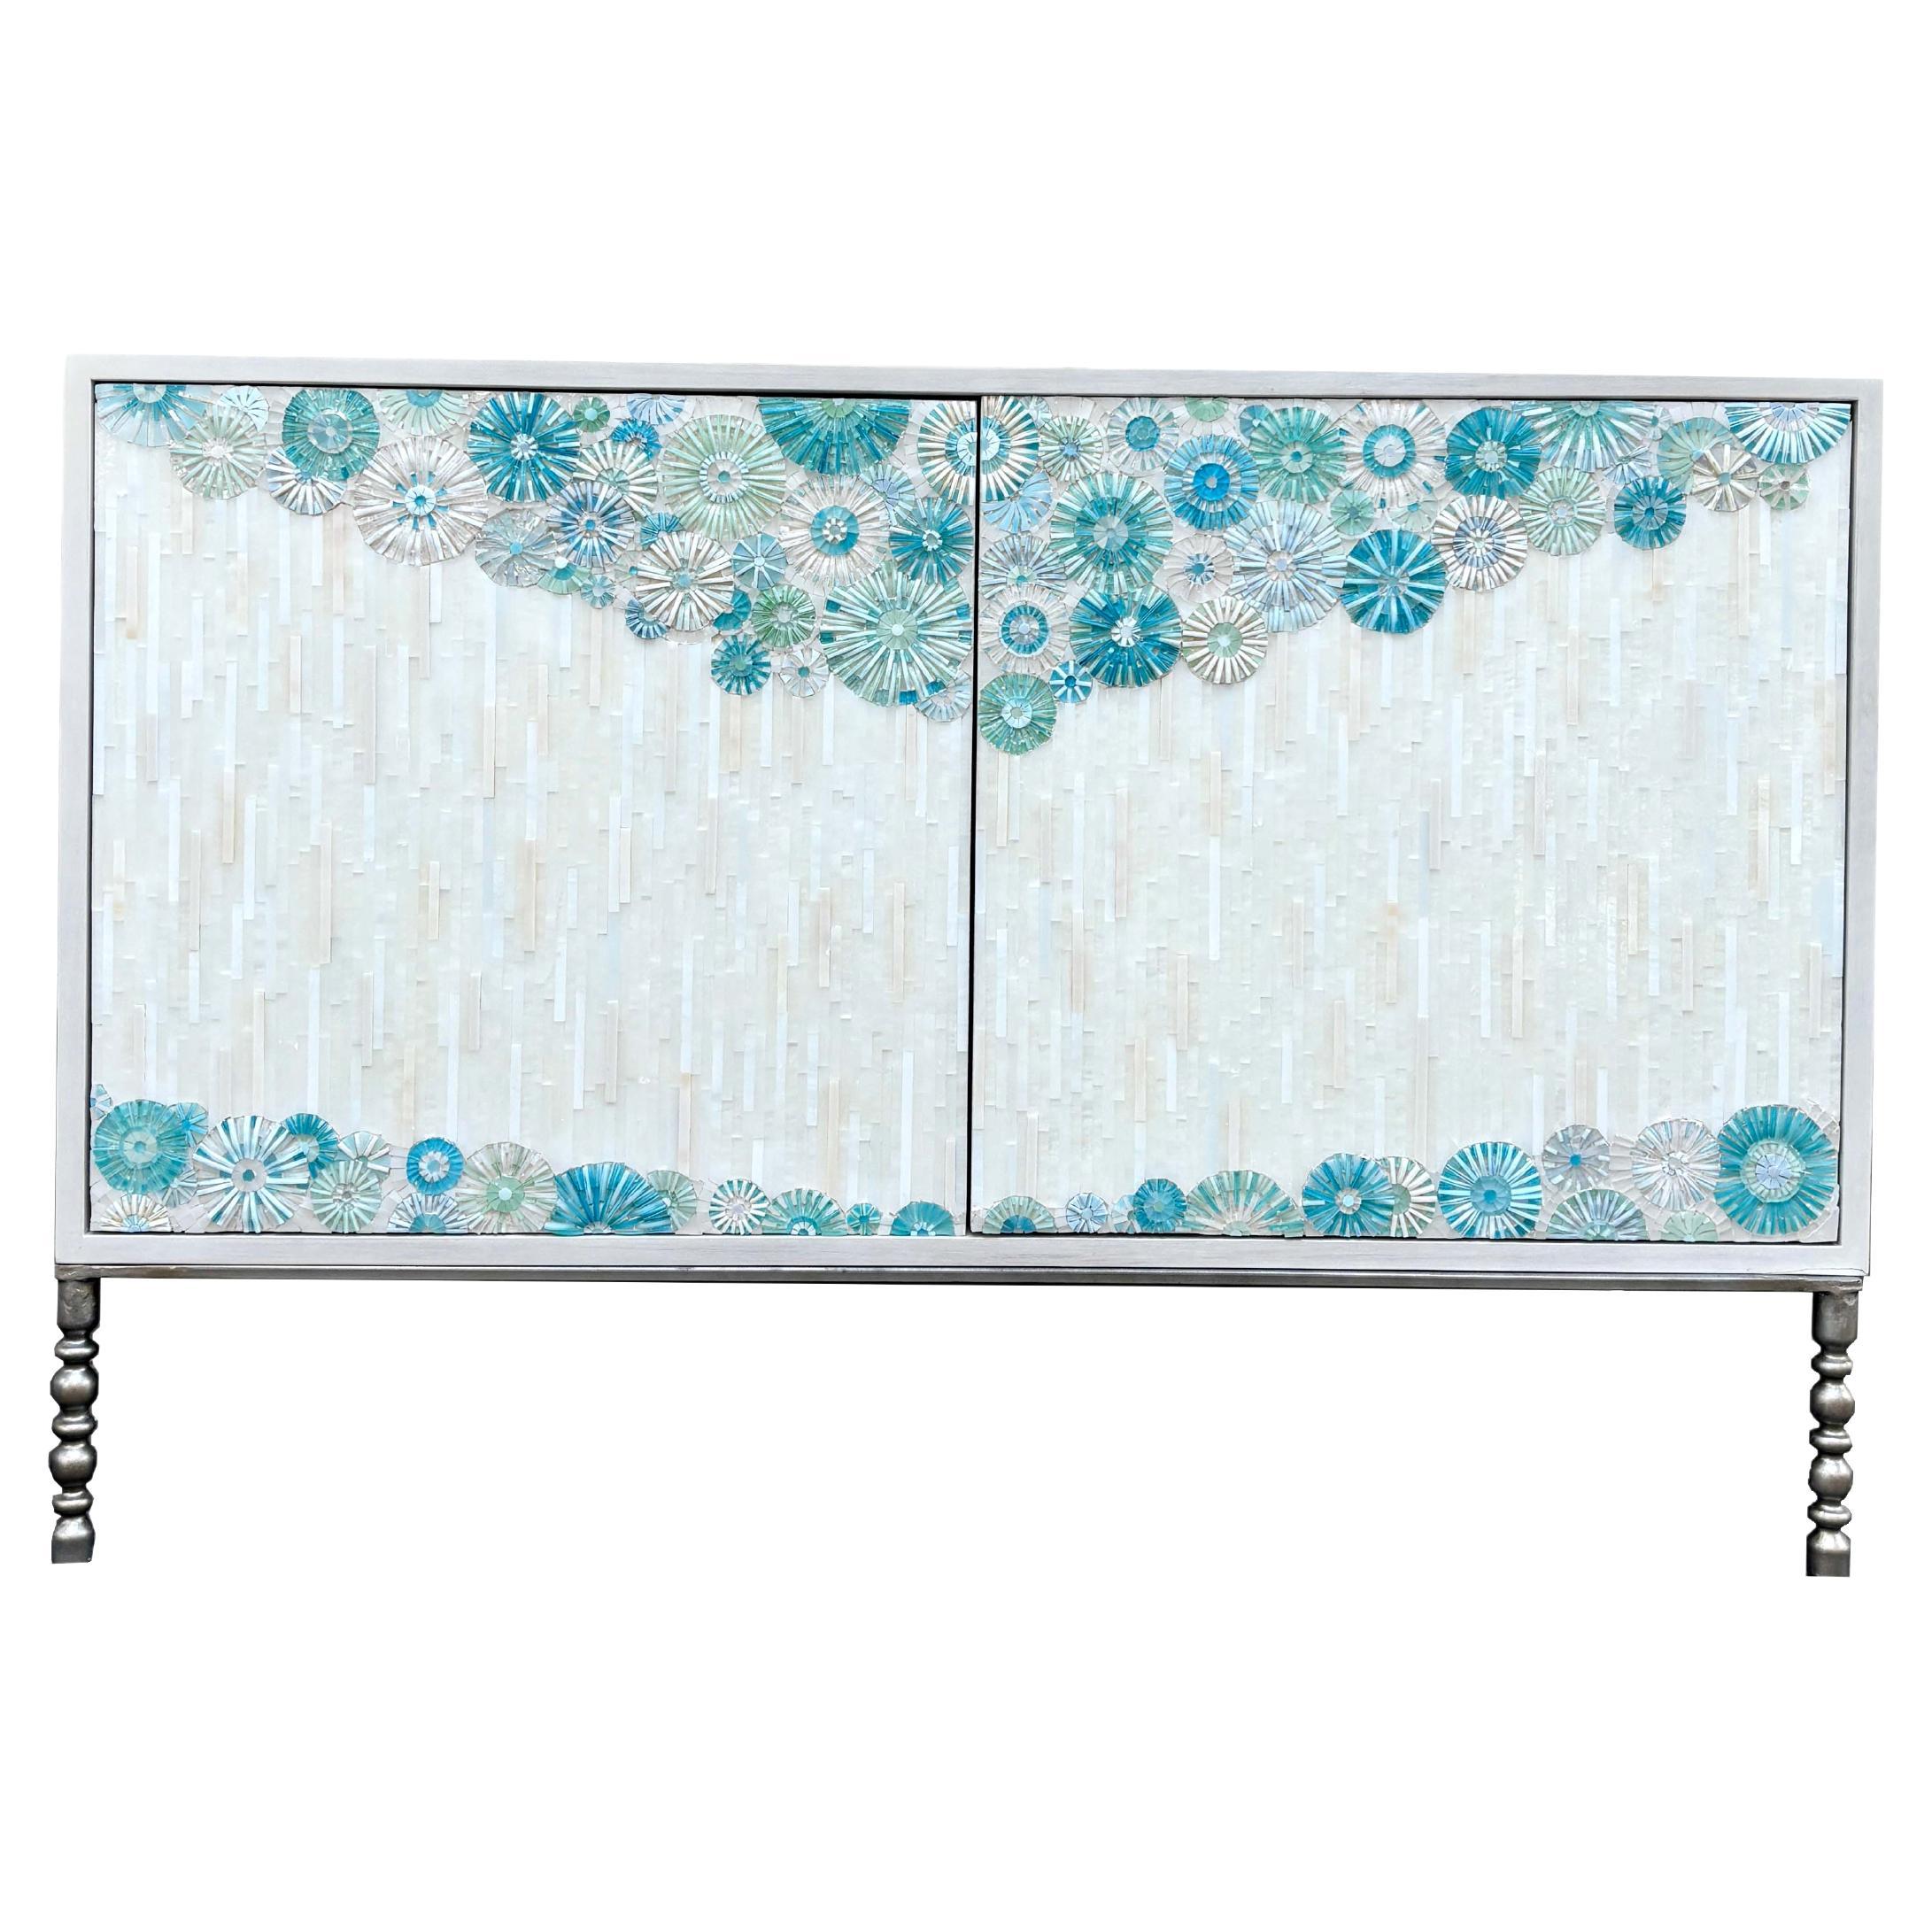 Modern Turquoise Blossom 2-Door Bathroom Vanity -Metal Style Base By Ercole Home For Sale